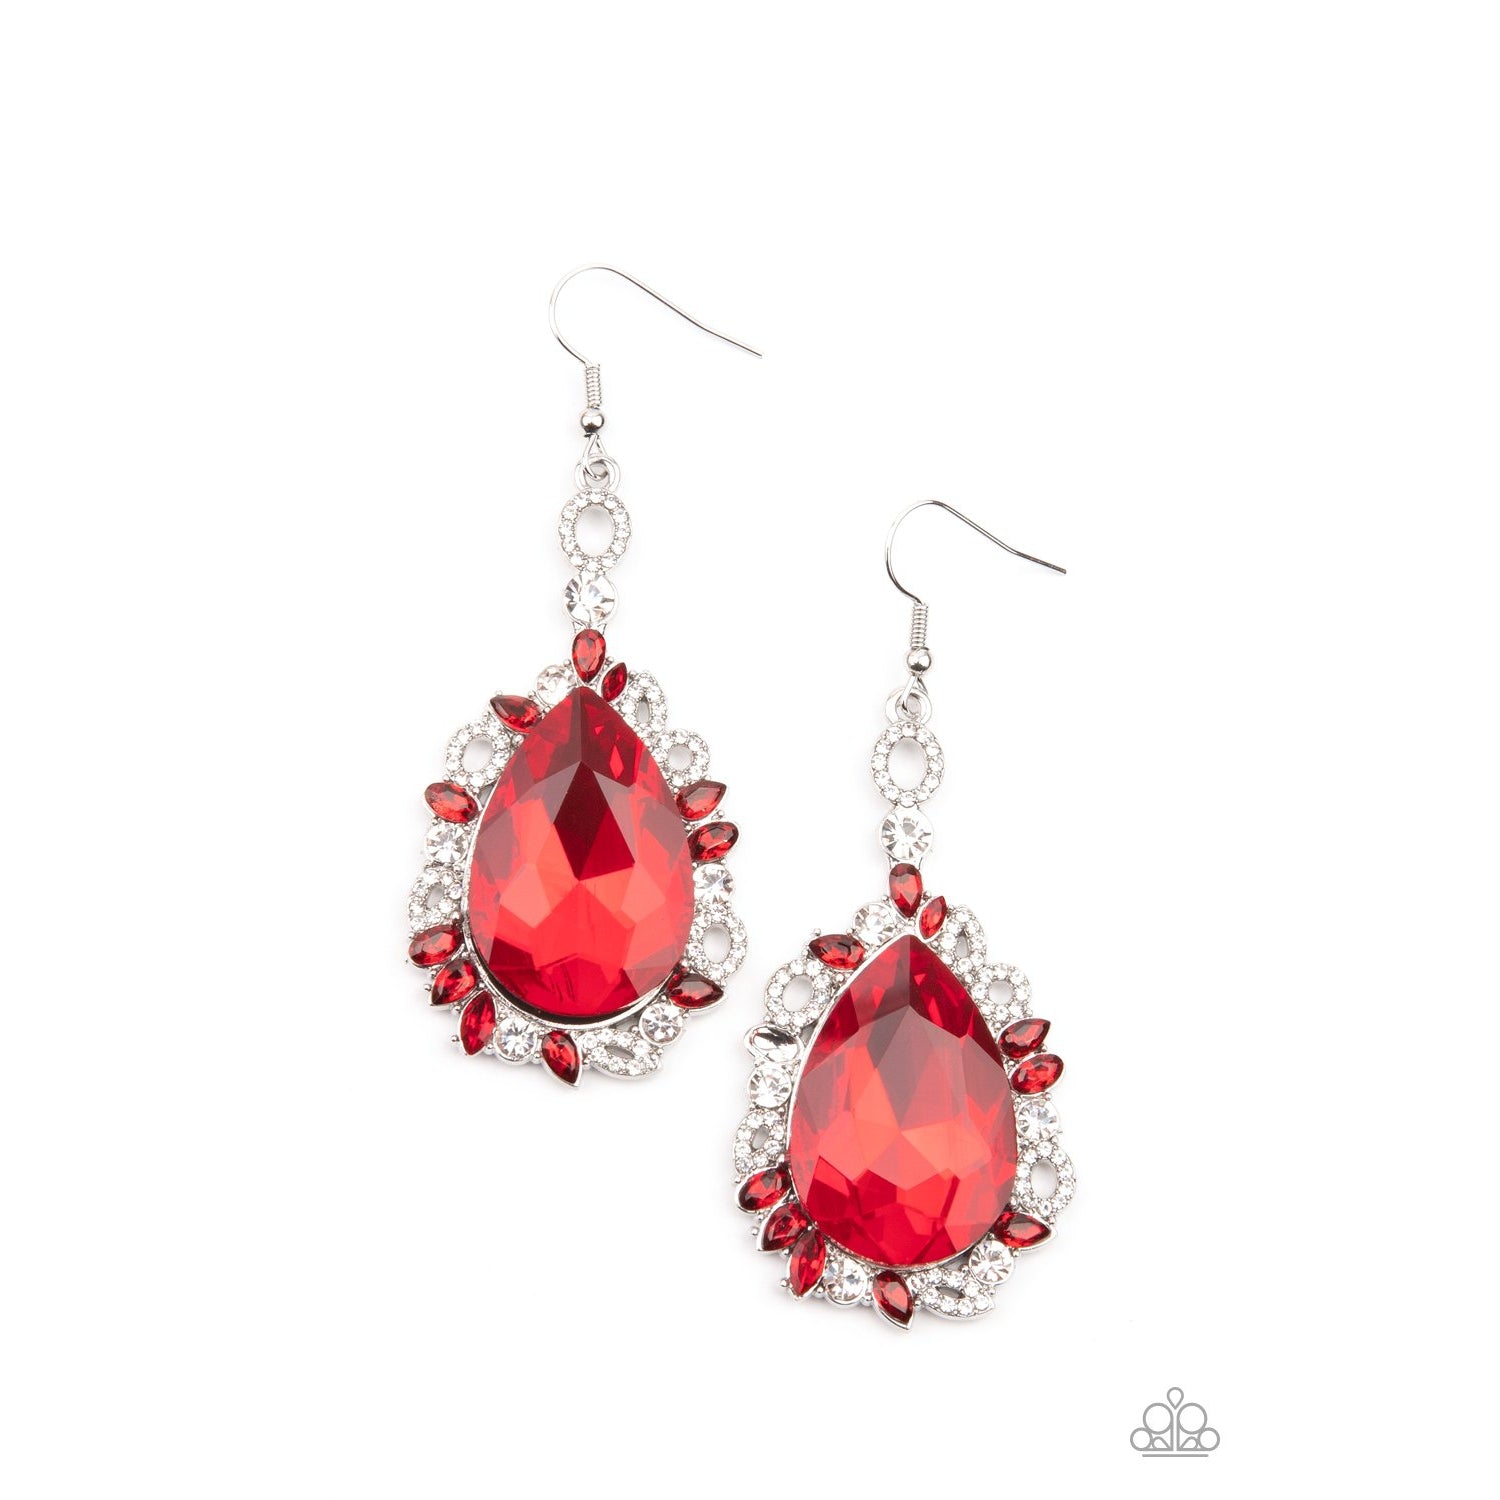 Royal Recognition - Red Rhinestone Earrings - Paparazzi Accessories - GlaMarous Titi Jewels